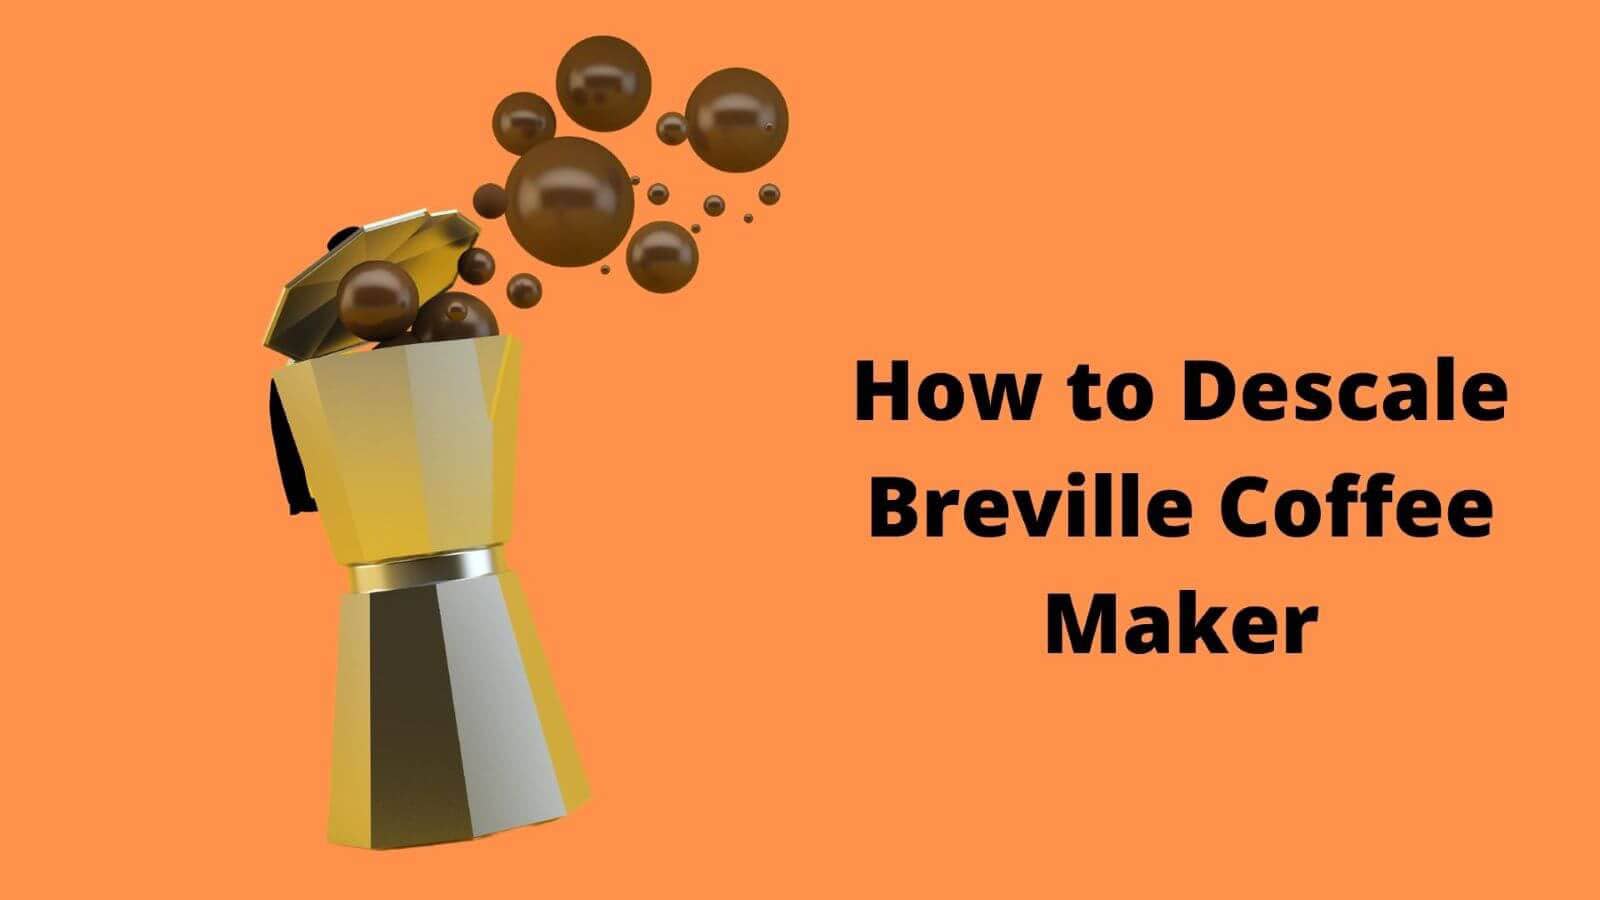 How to Descale Breville Coffee Maker